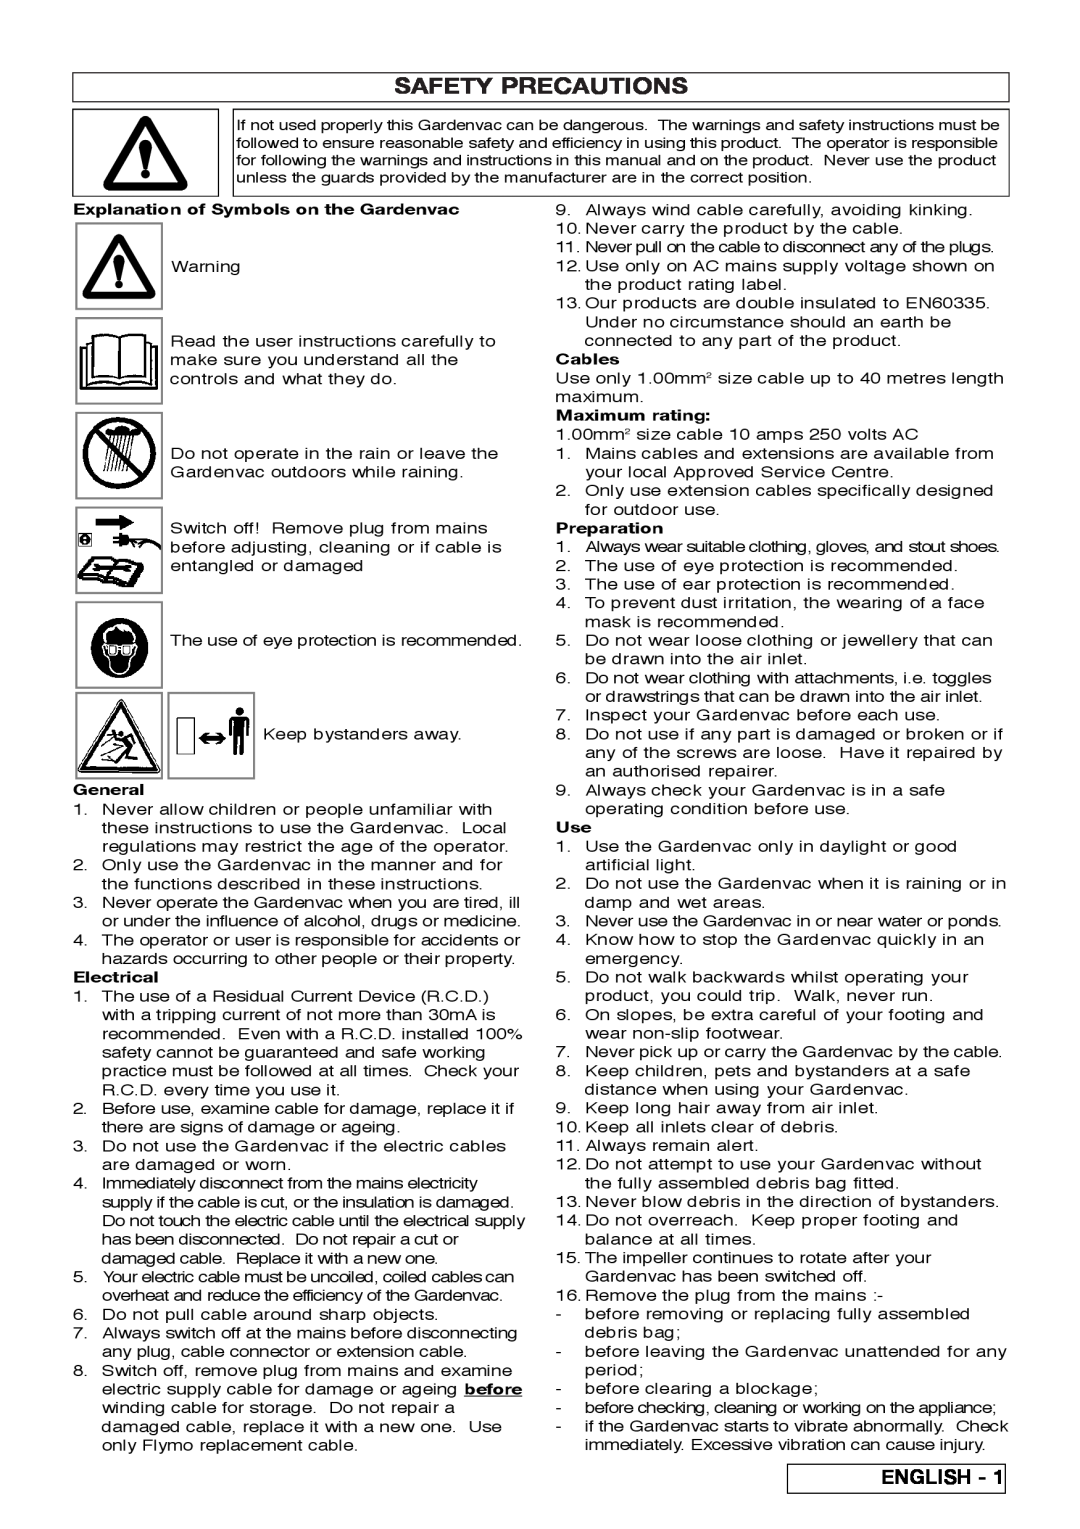 Flymo 2200 Safety Precautions, English, Explanation of Symbols on the Gardenvac, General, Electrical, Cables, Preparation 